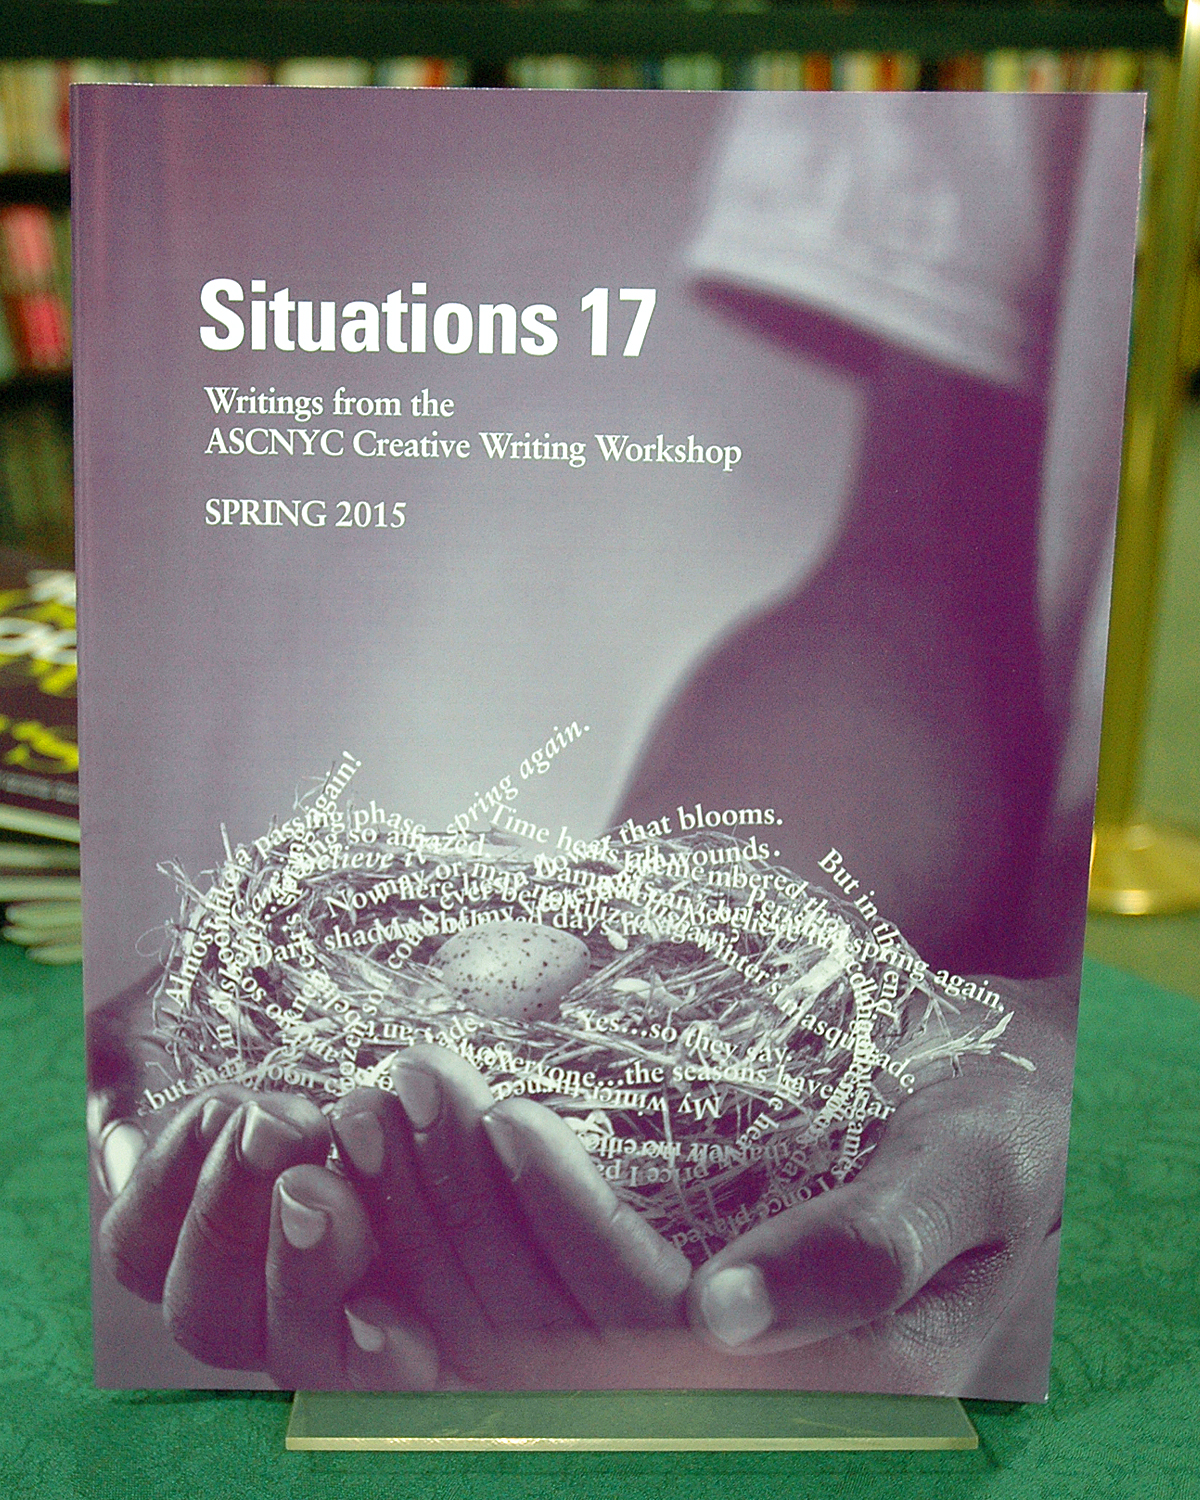 Situations 17 - Writings from the ASCNYC Creative Writing Workshop - Spring 2015